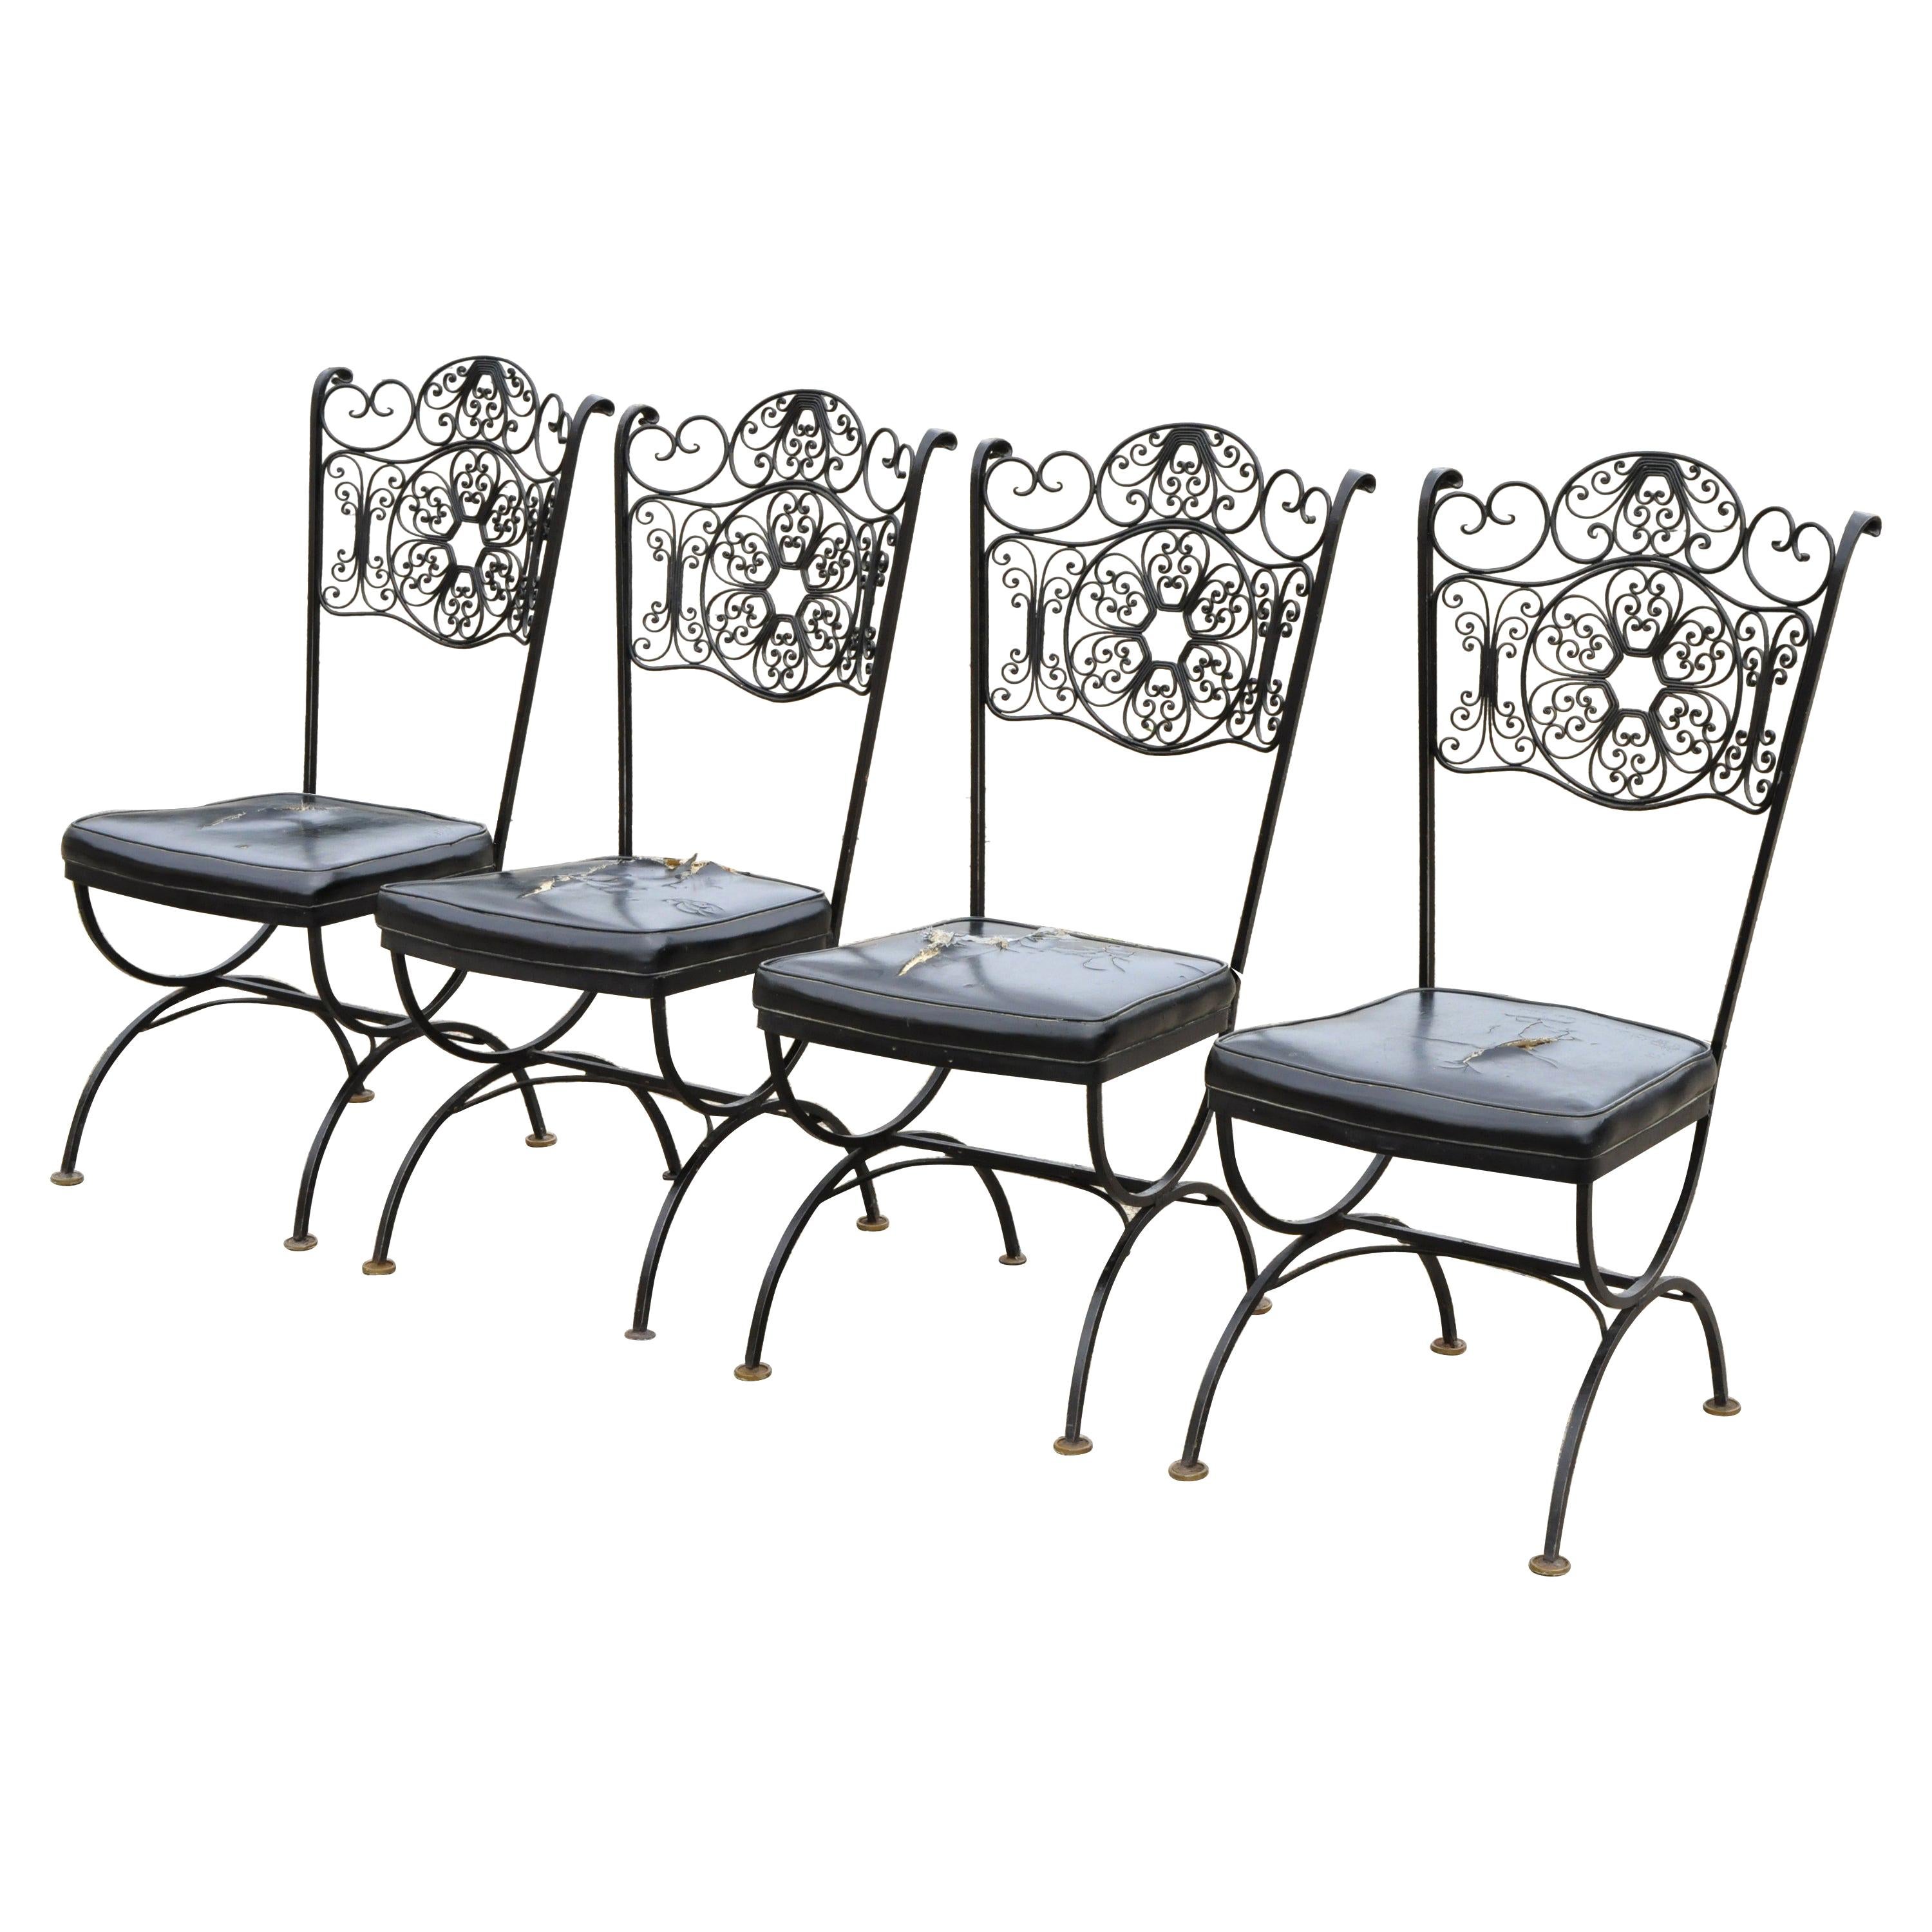 4 Vintage Woodard Andalusian Style Wrought Iron Dining Chairs by Contempo Frames